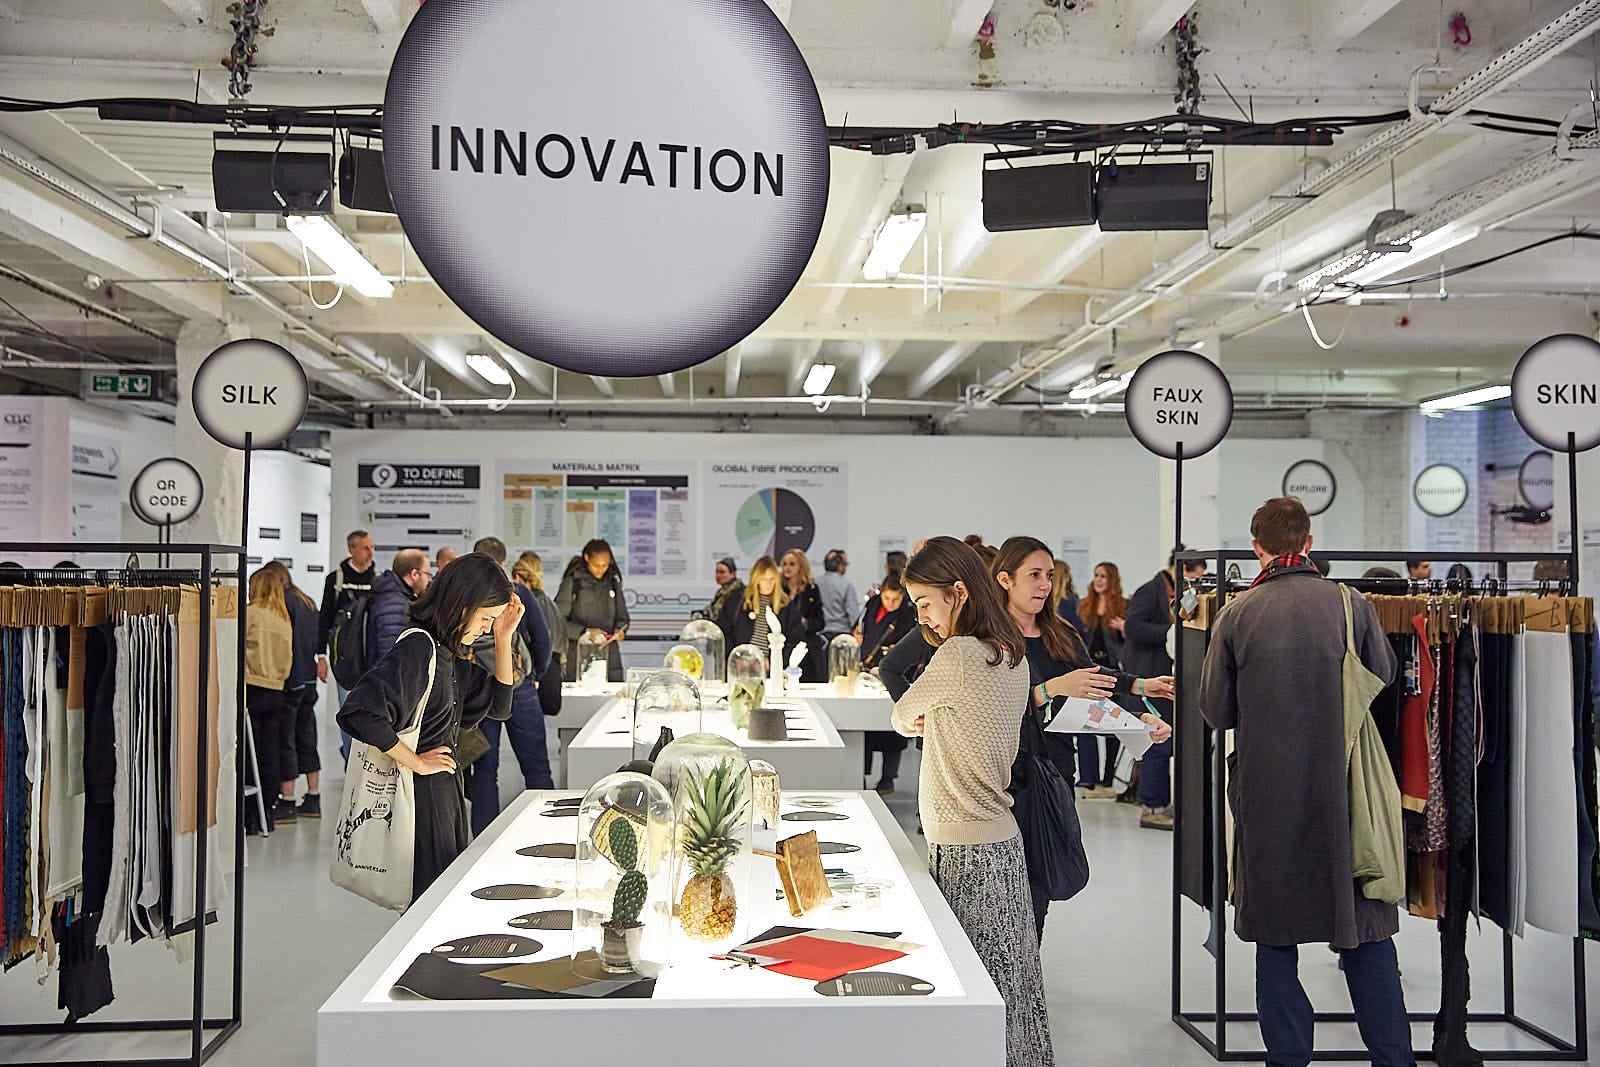 Photo showing a sustainable fashion innovation exhibition with people looking at different stalls